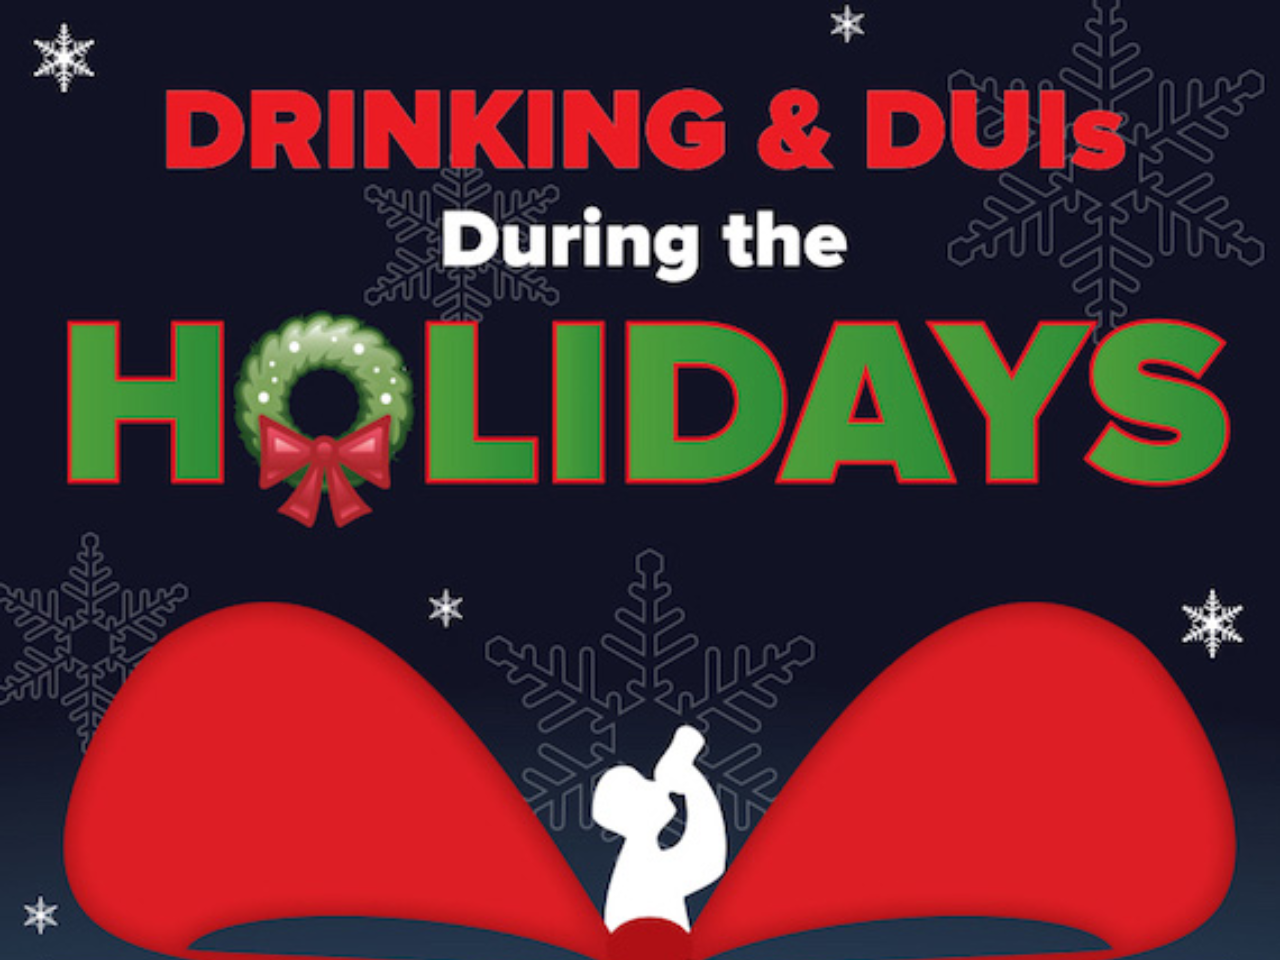 Drinking & DUIs During the Holidays